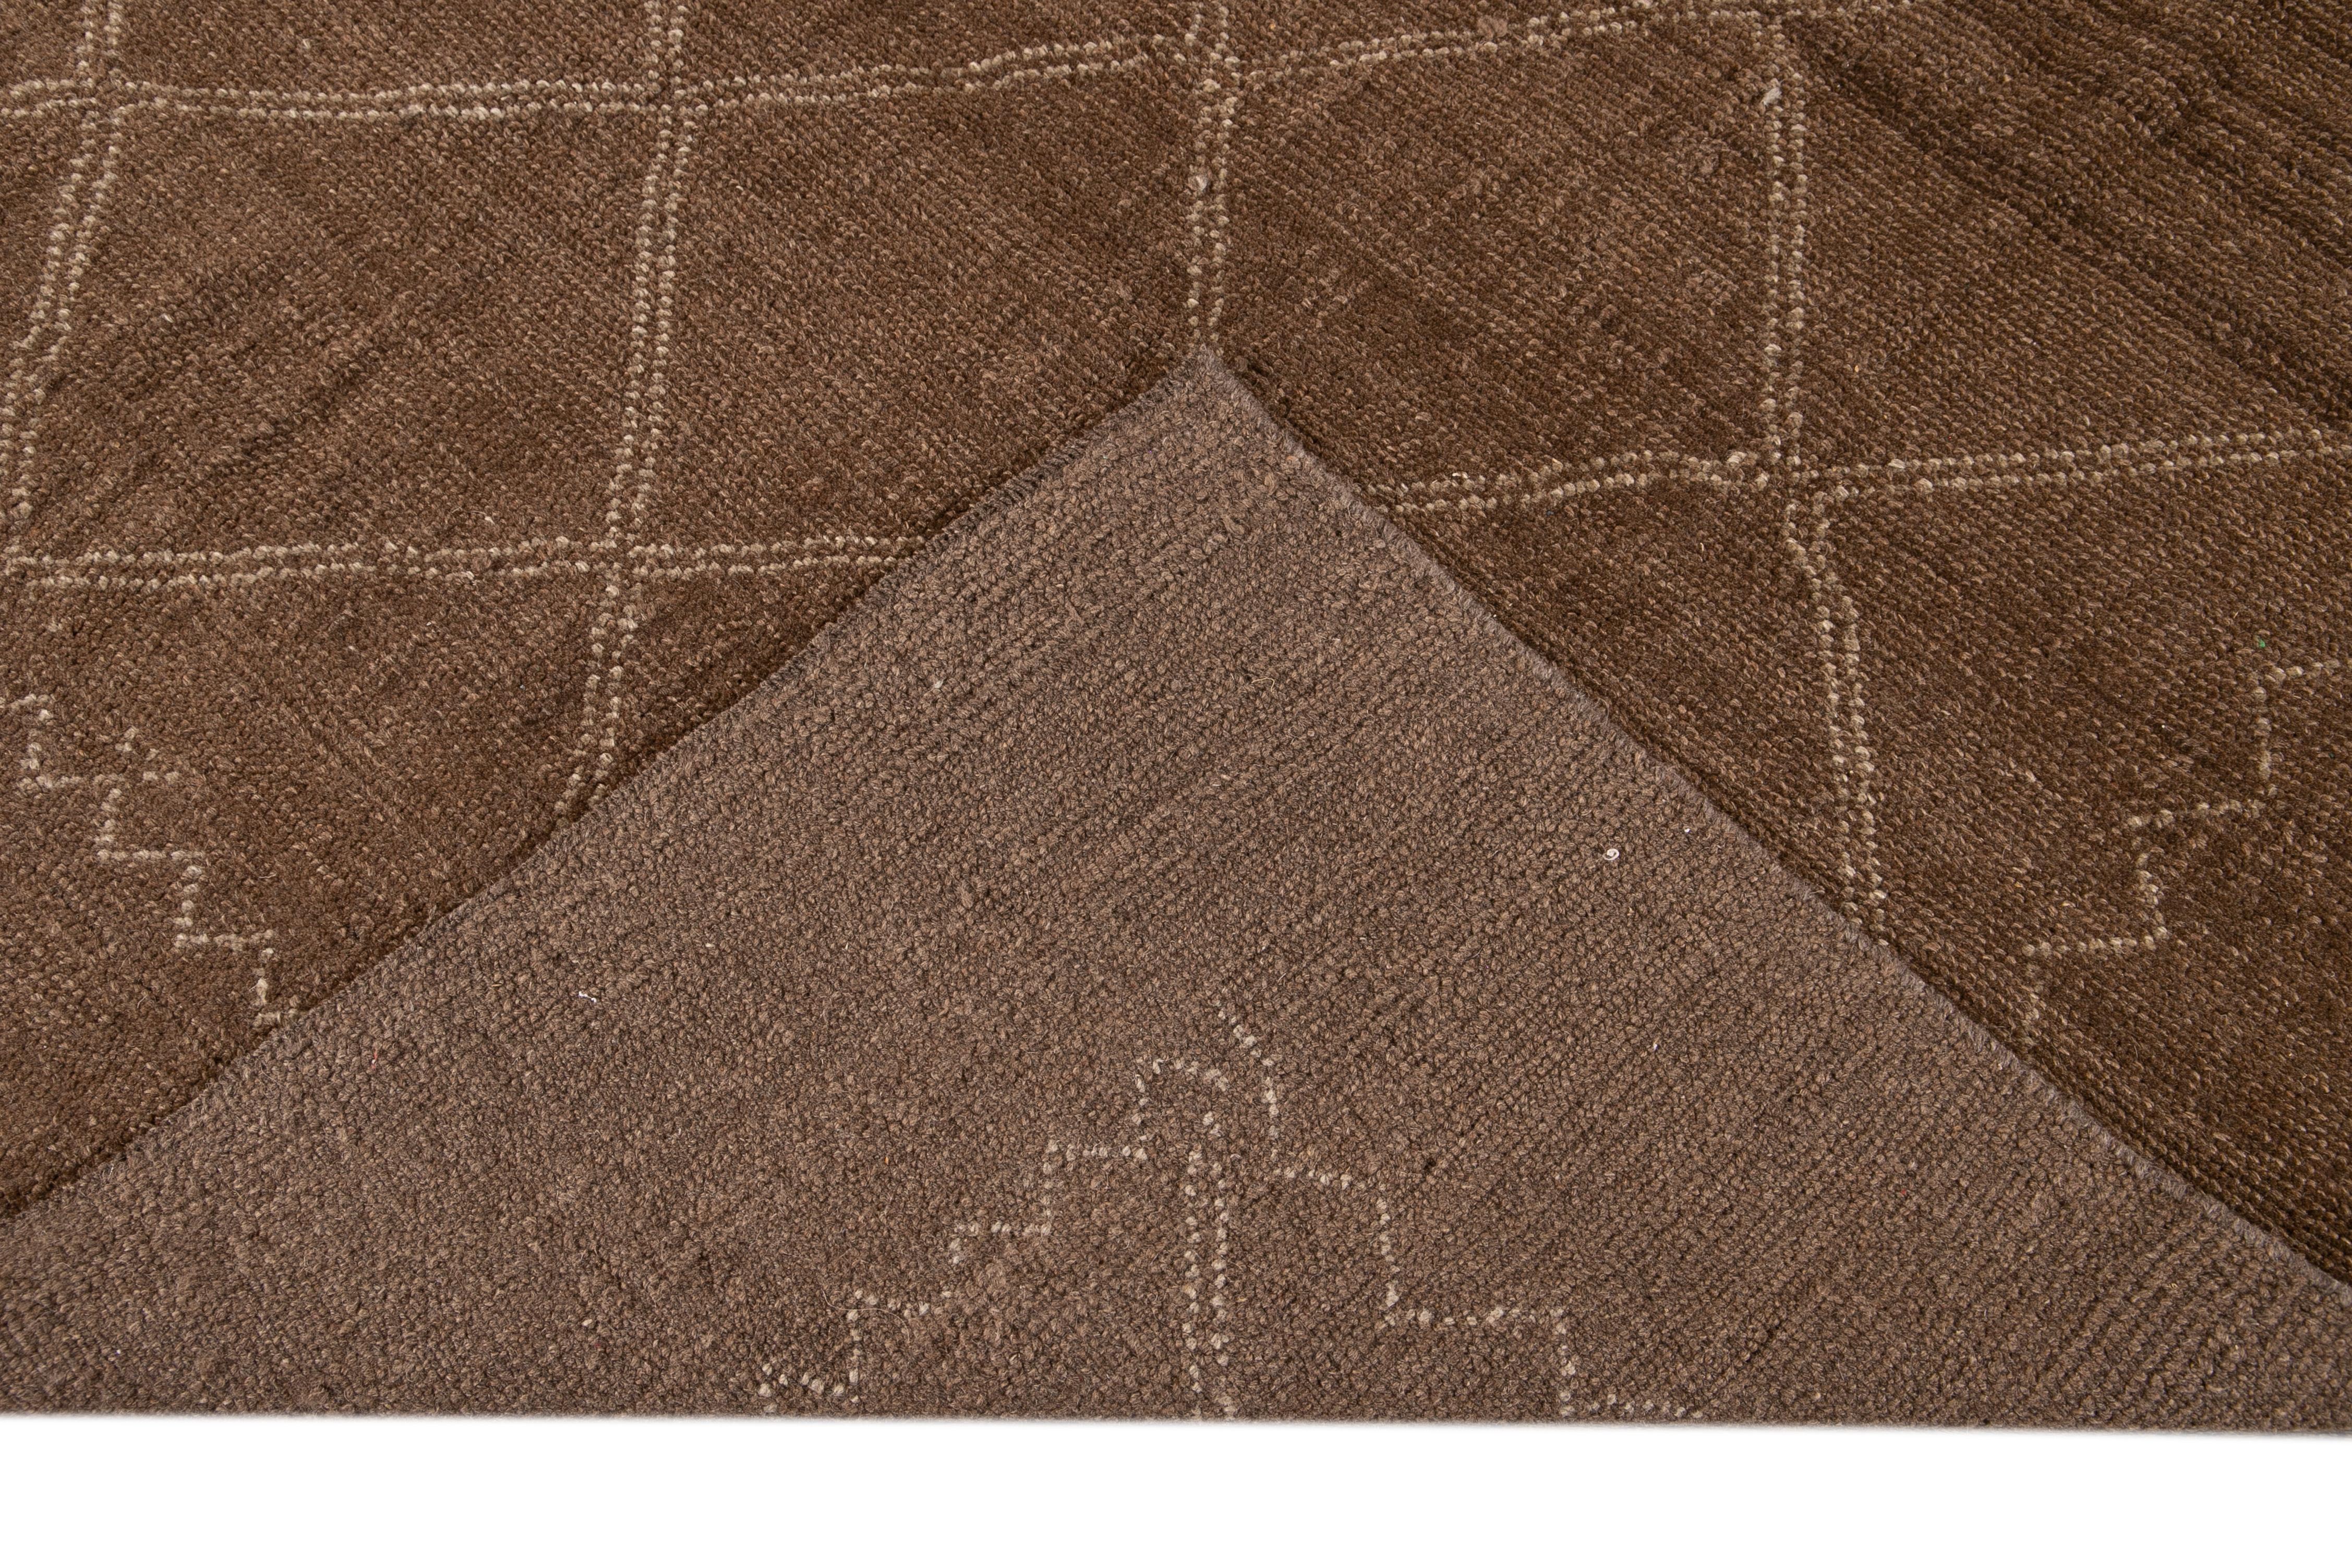 Beautiful contemporary Moroccan style hand-knotted wool rug with a brown field. This Moroccan rug has a beige accent in a gorgeous geometric diamond pattern design.

This rug measures 7' x 9'.

